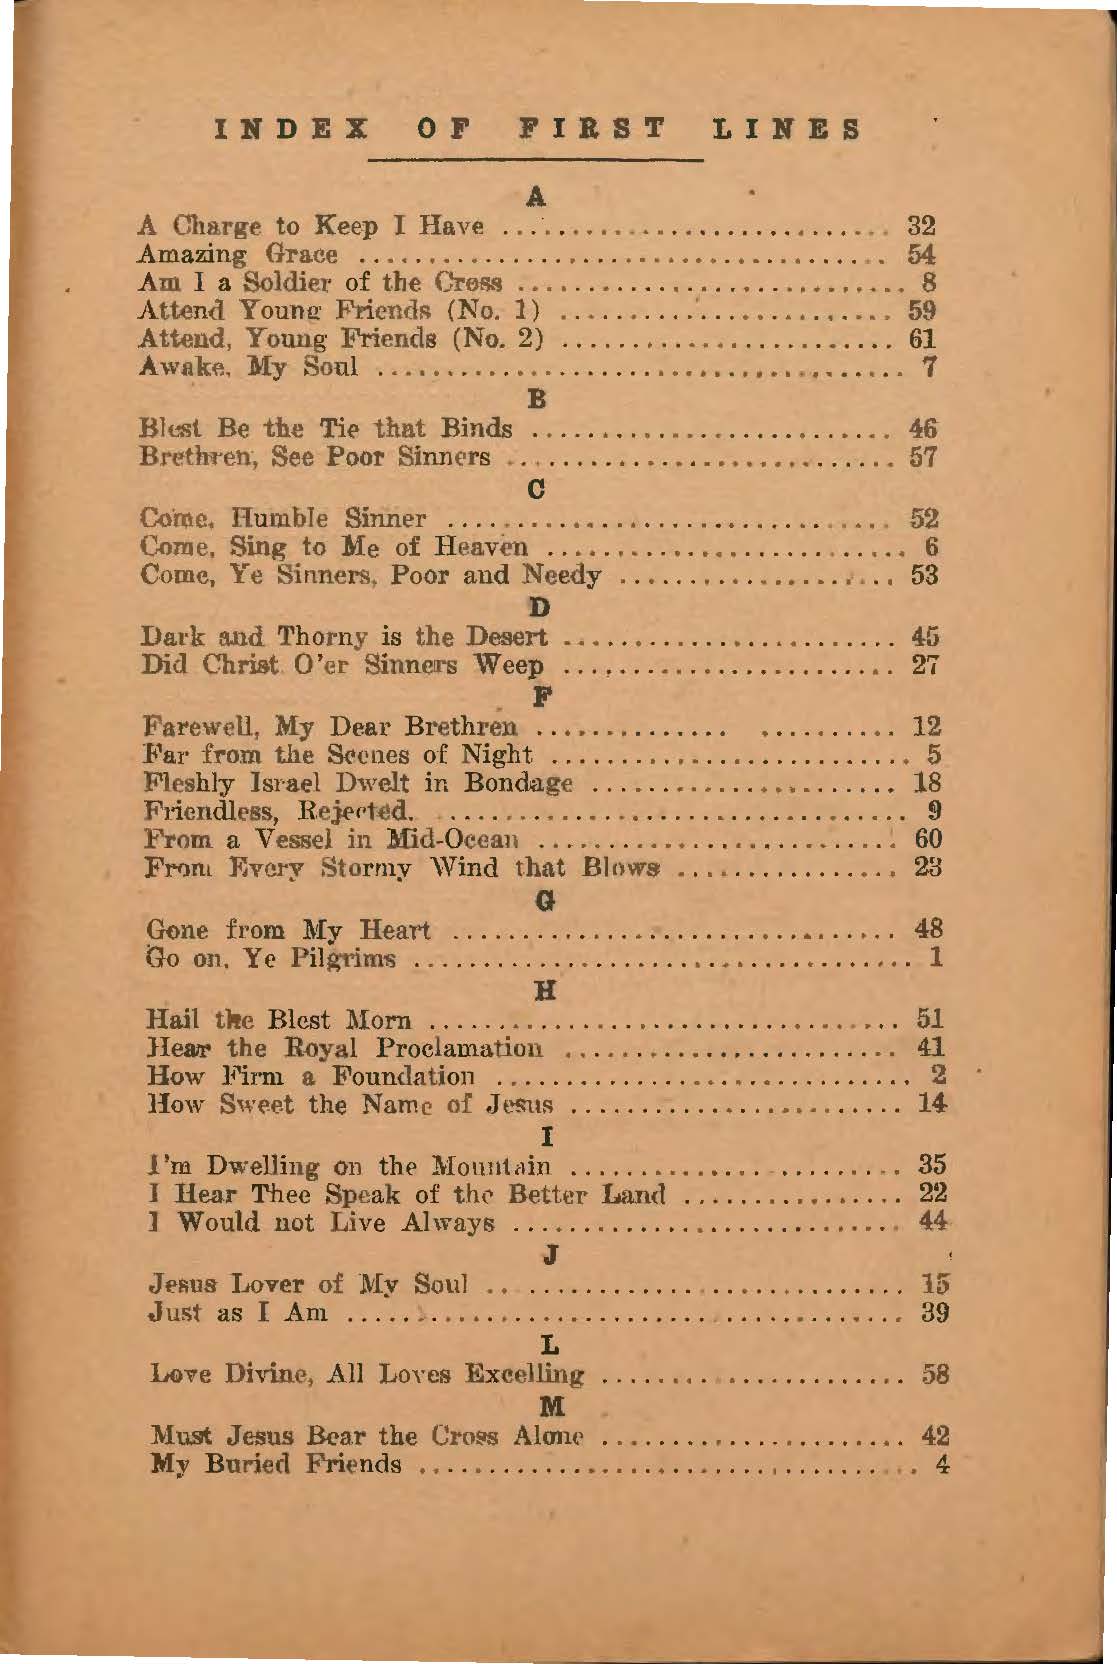 Earnest C. Love, International Melodies, 1924, index of first lines